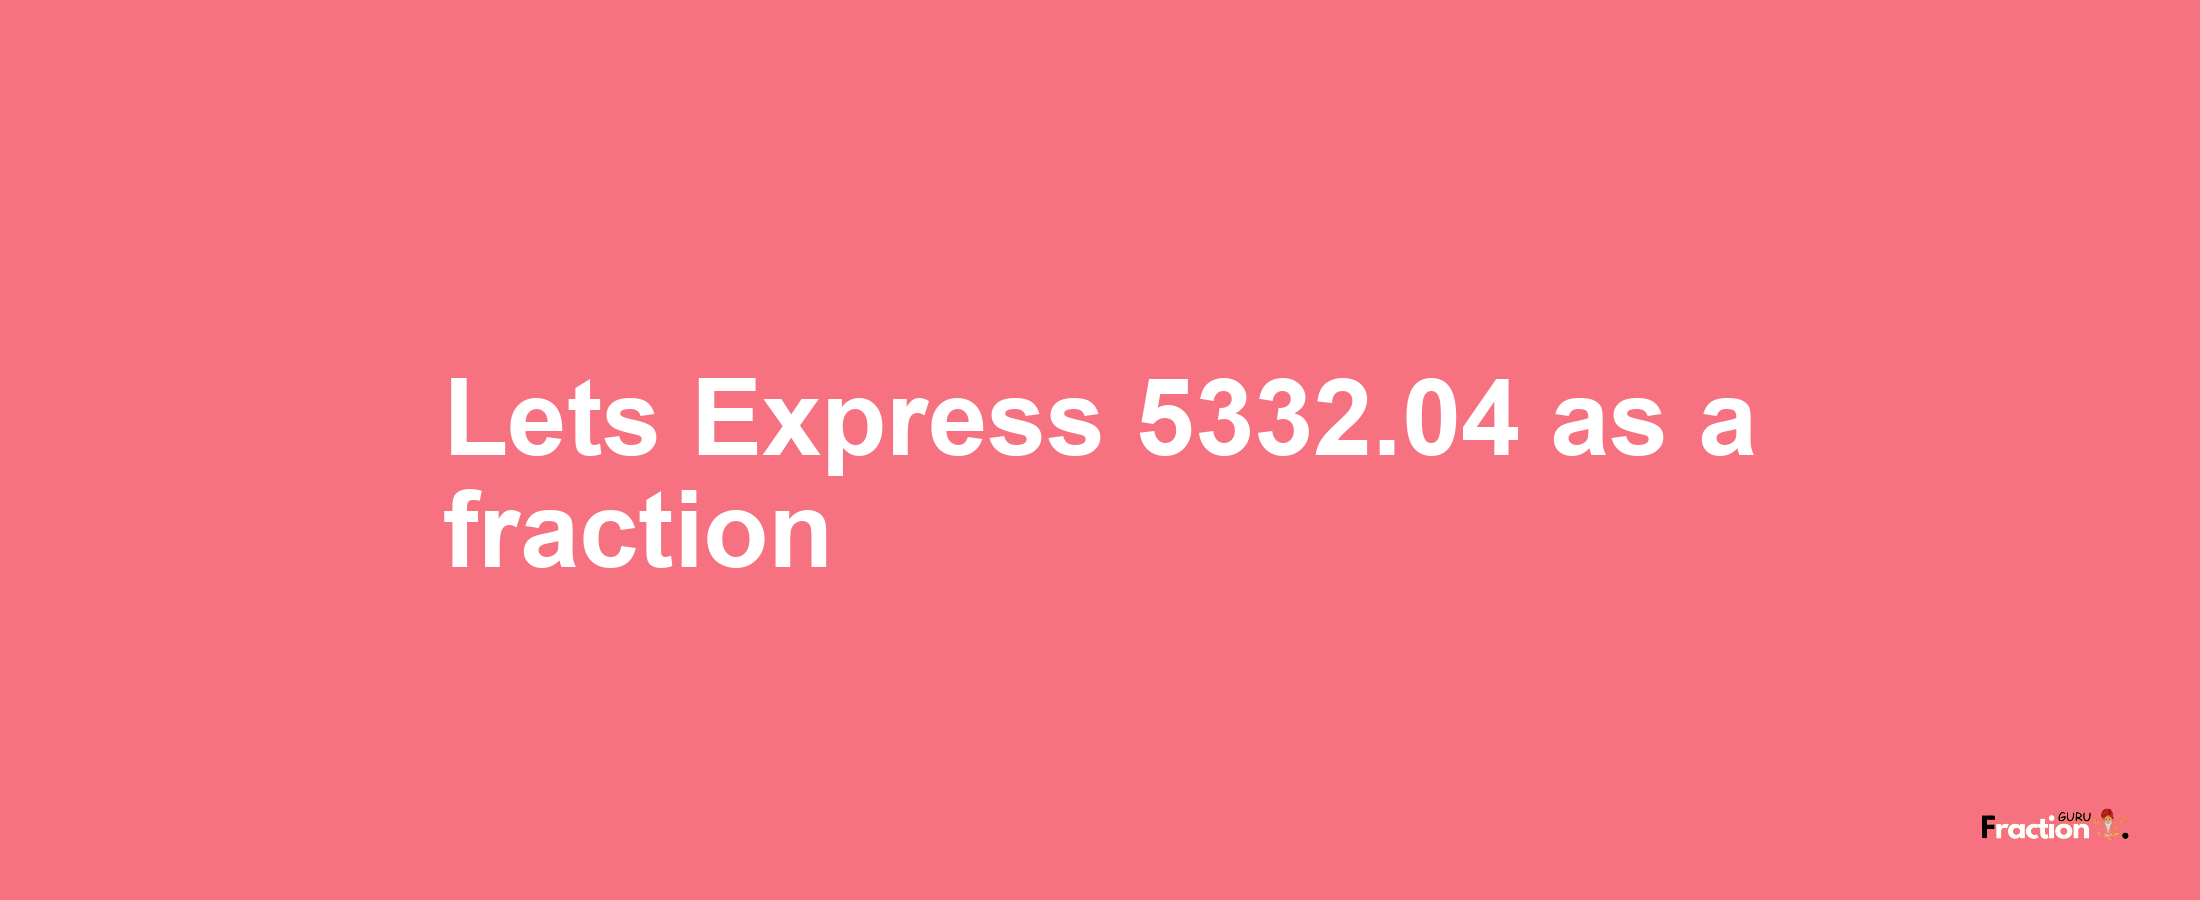 Lets Express 5332.04 as afraction